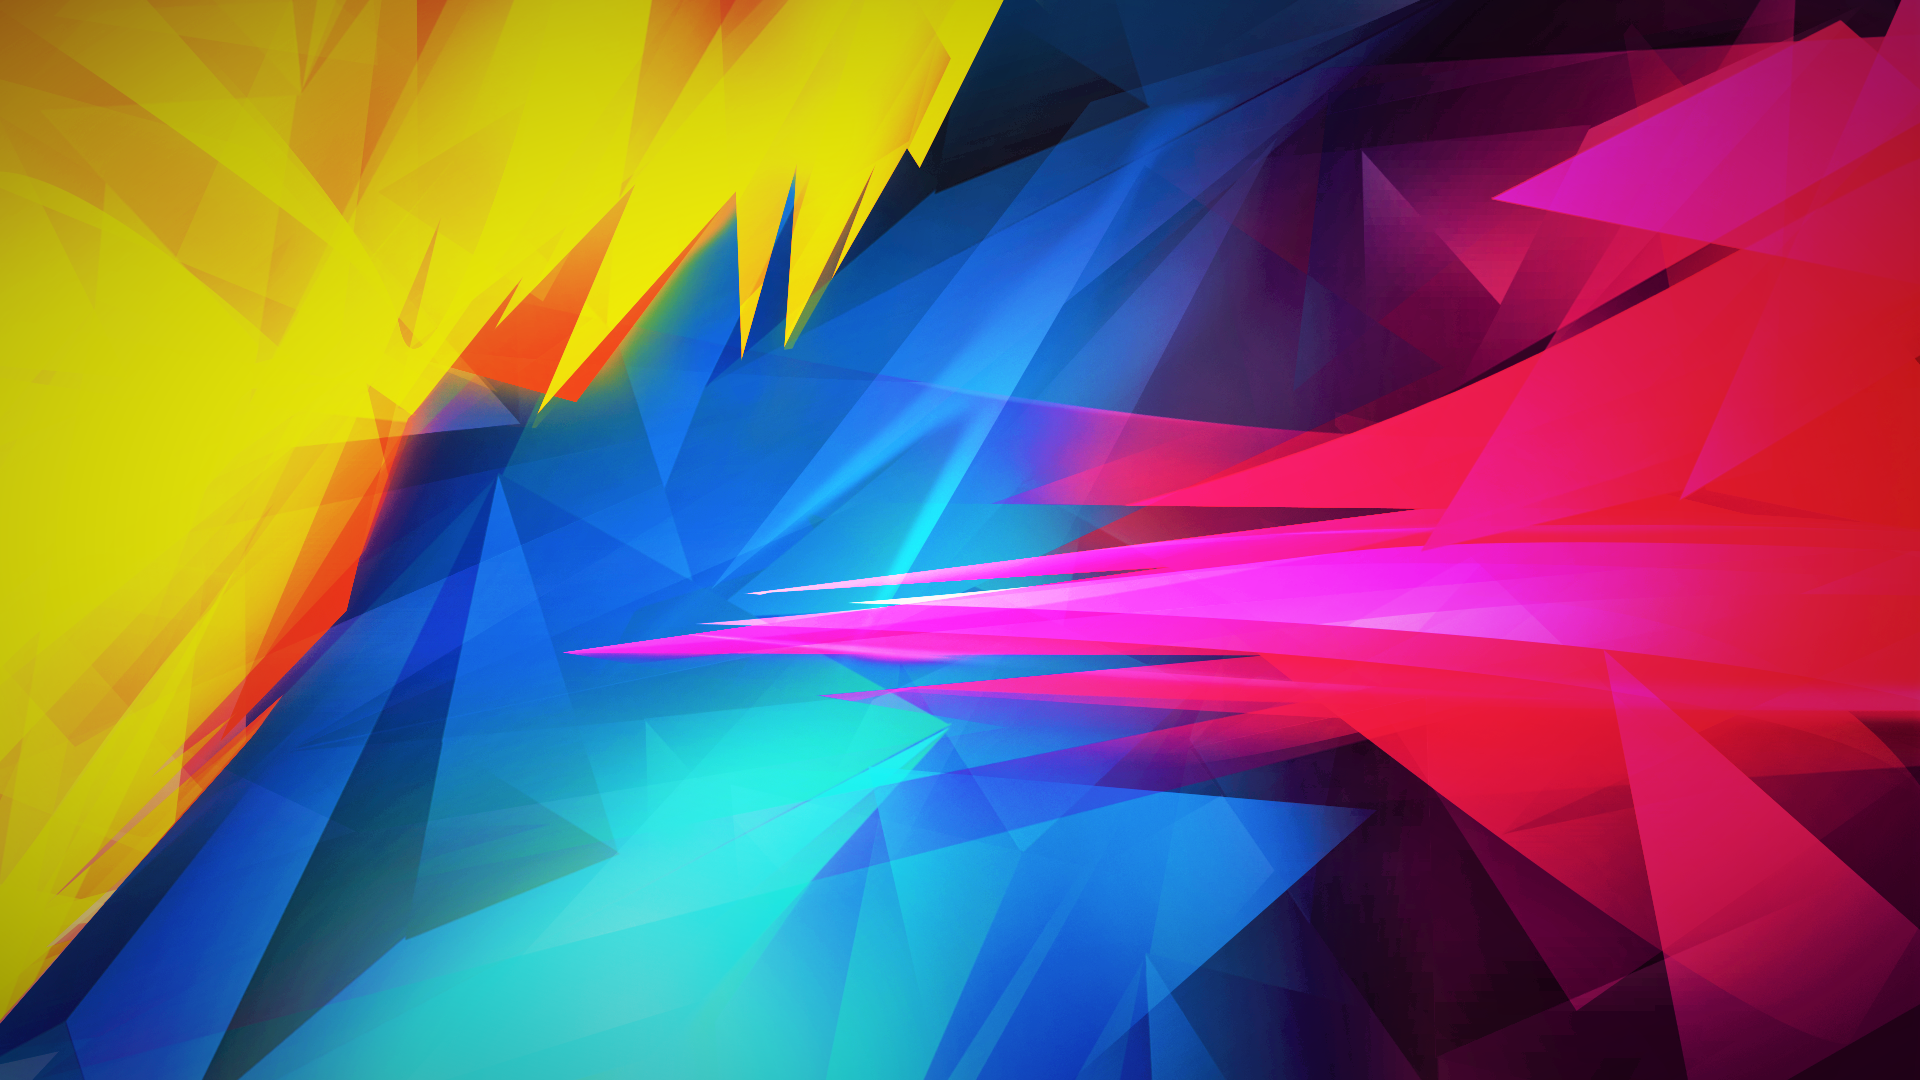 General 1920x1080 abstract blue yellow red pink purple orange colorful cyan magenta CMYK